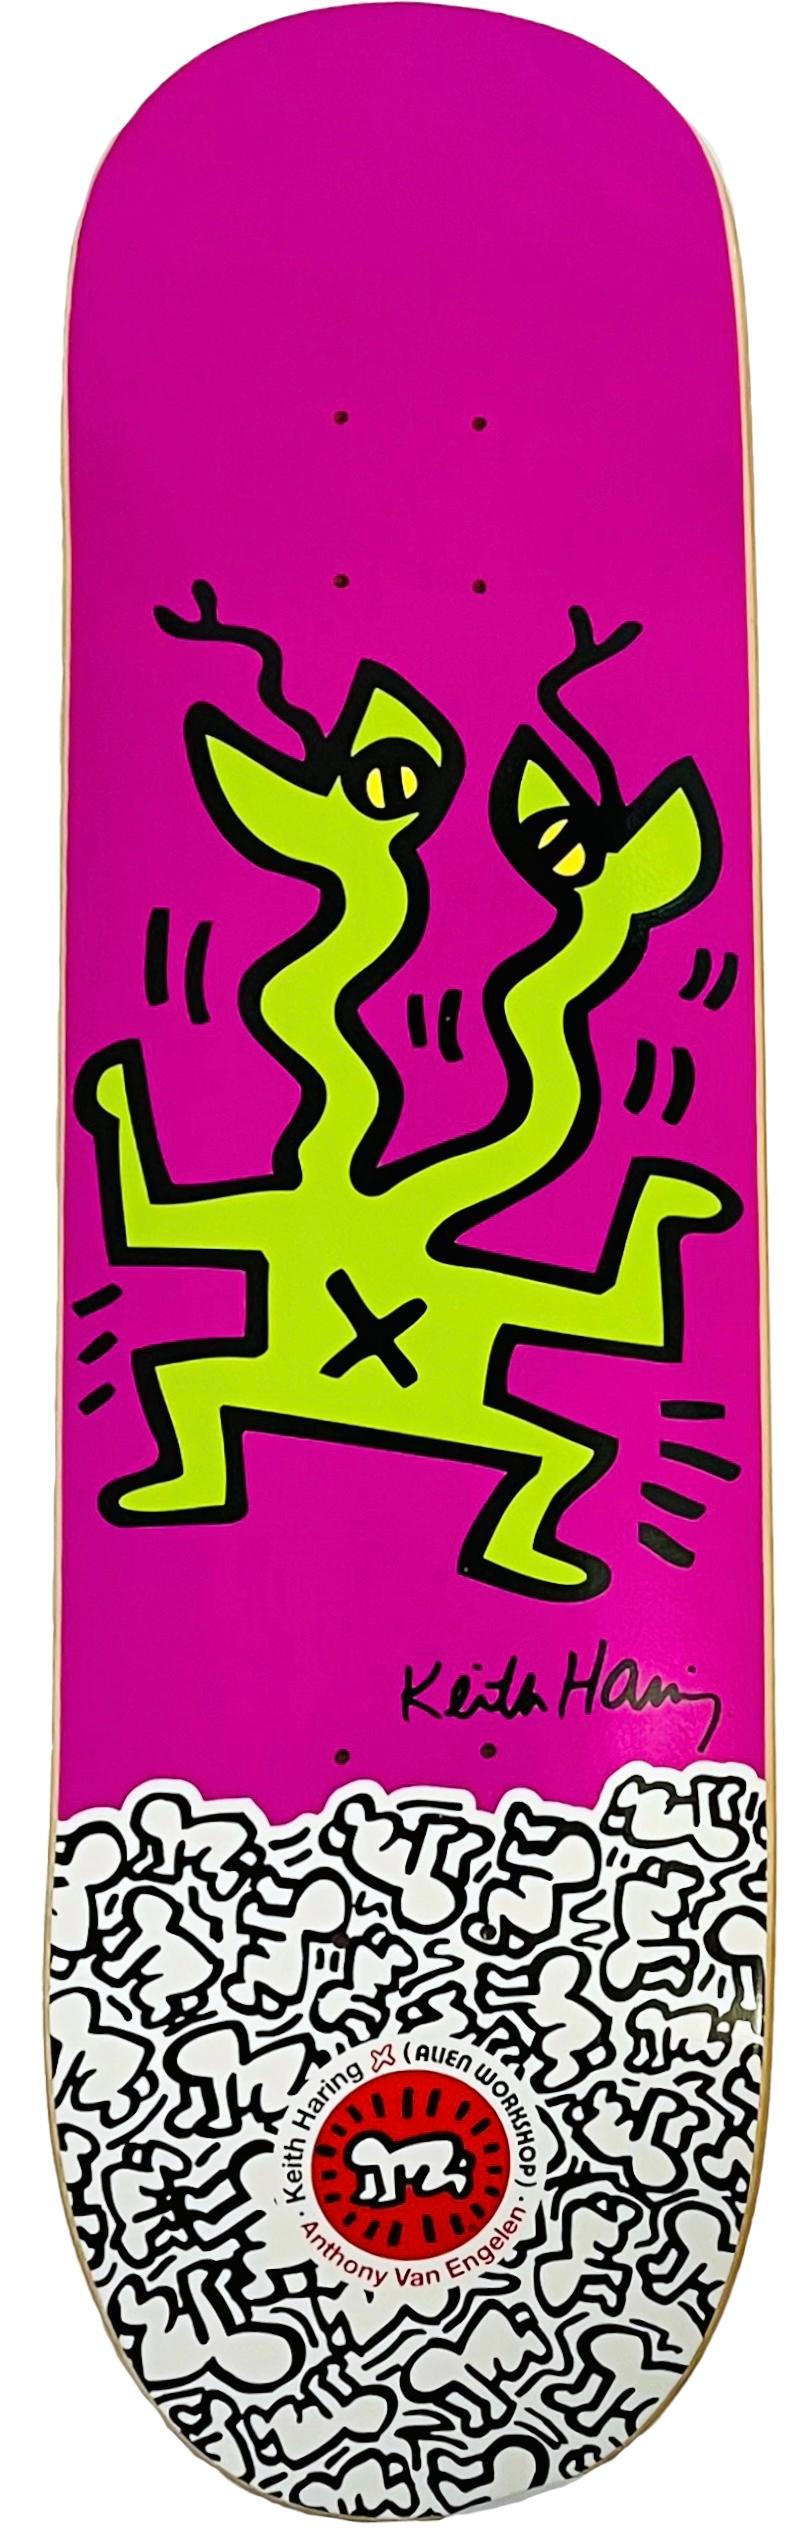 Keith Haring Skateboard Deck (Keith Haring snakes) - Pop Art Sculpture by (after) Keith Haring